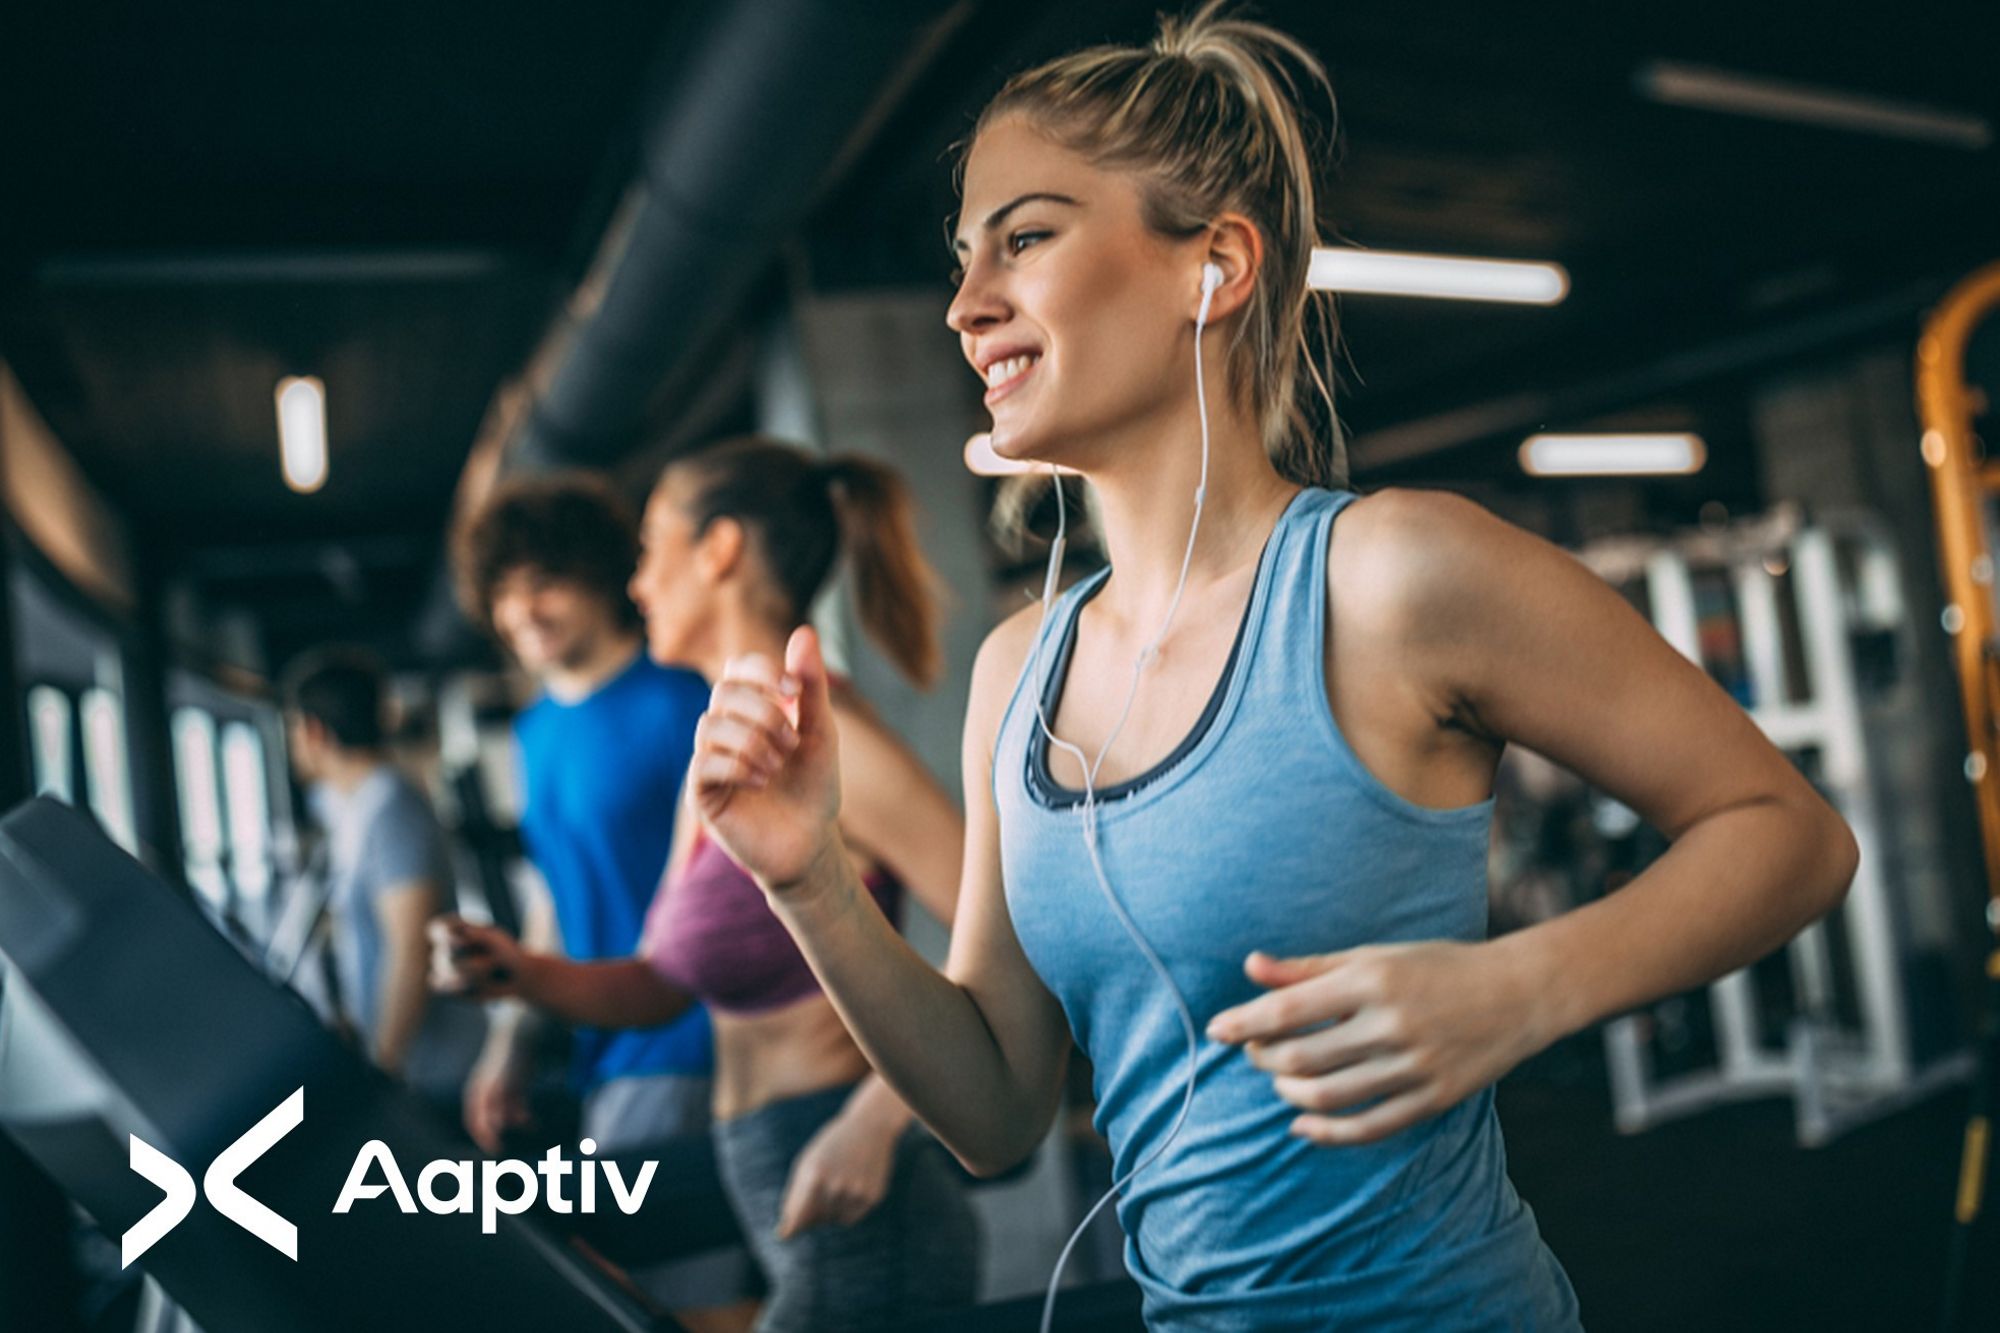 Free Audio Fitness Classes with Aaptiv